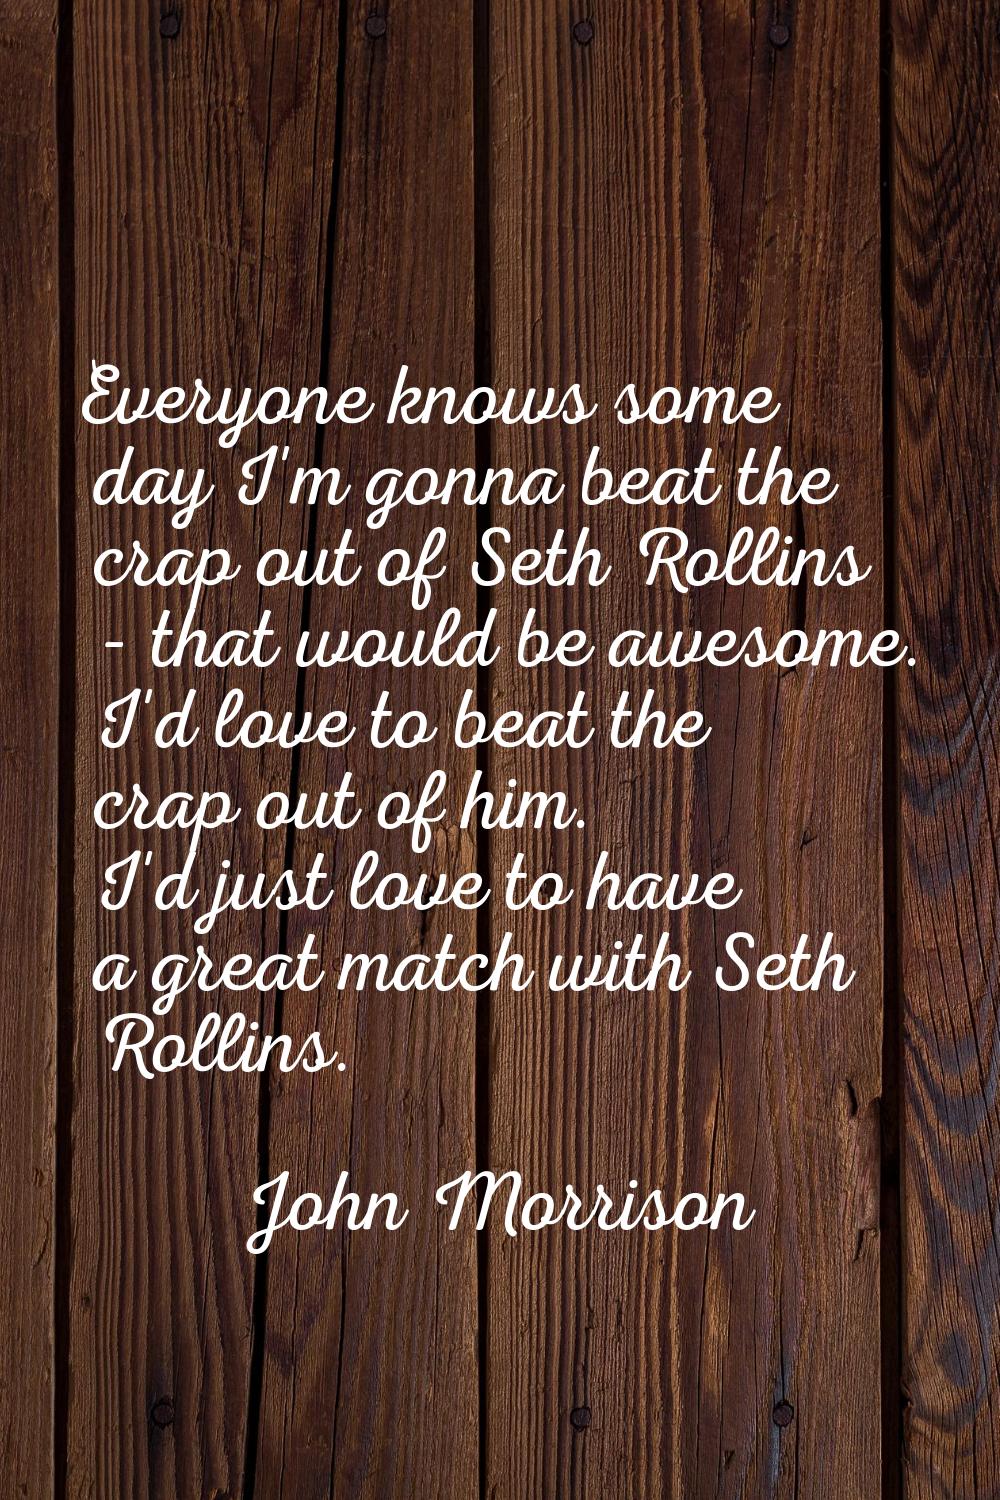 Everyone knows some day I'm gonna beat the crap out of Seth Rollins - that would be awesome. I'd lo